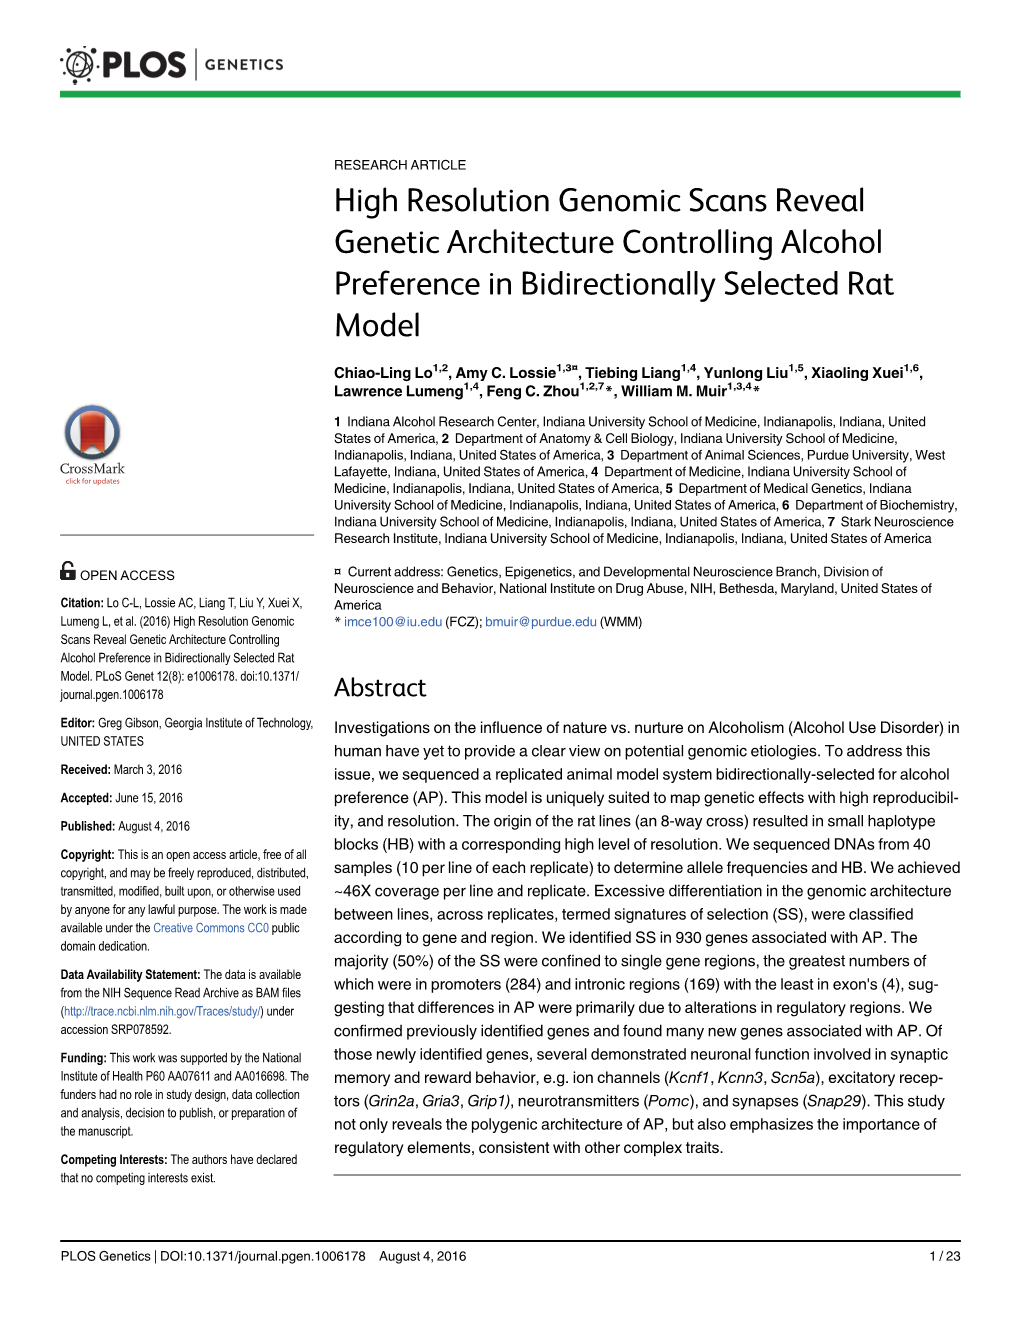 High Resolution Genomic Scans Reveal Genetic Architecture Controlling Alcohol Preference in Bidirectionally Selected Rat Model